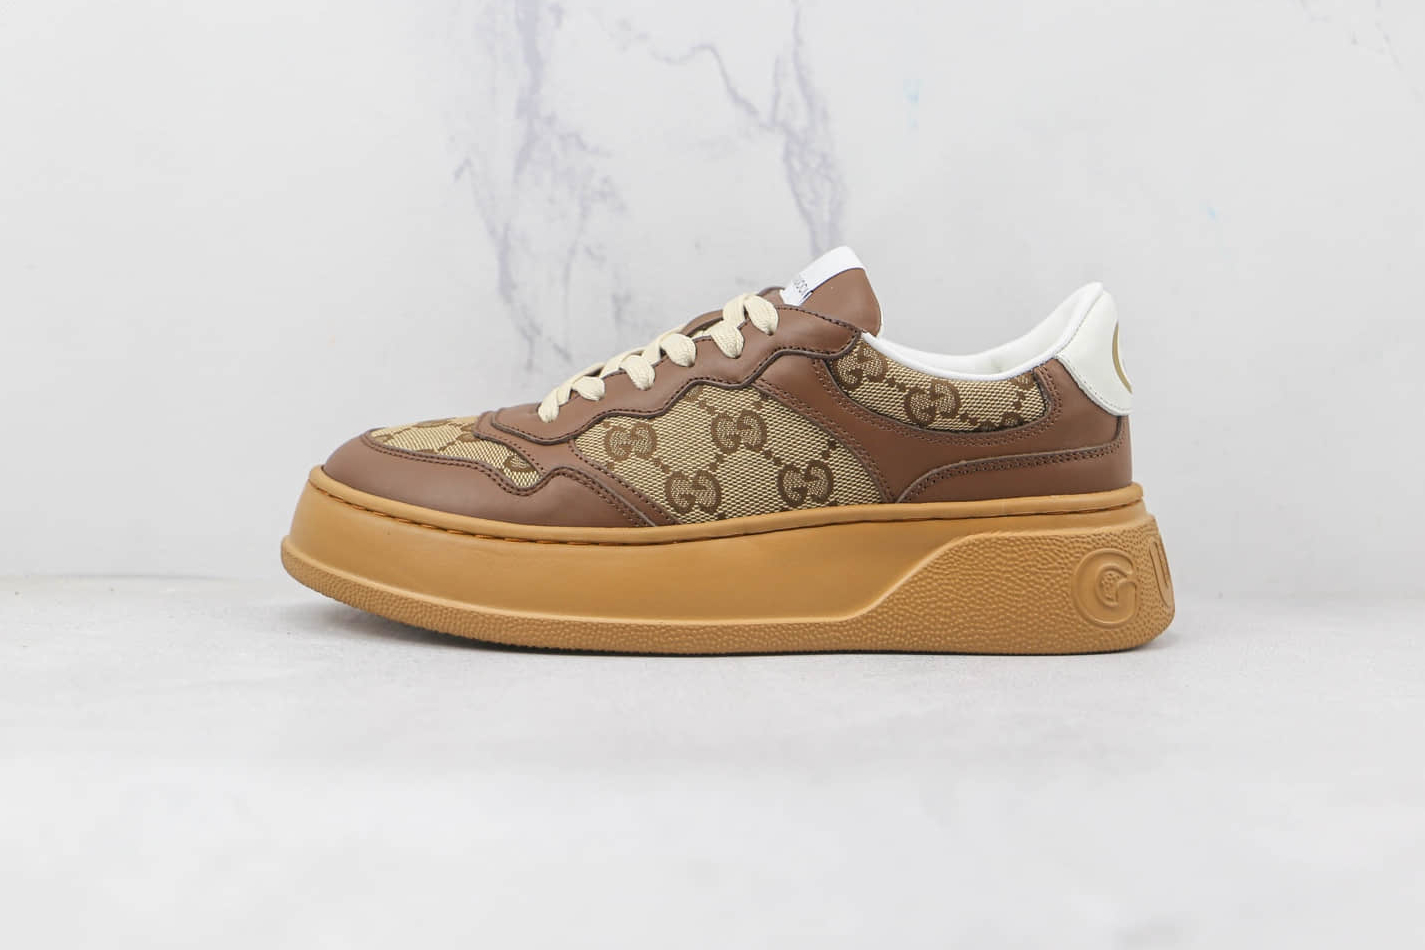 Gucci GG Sneaker 'Beige' 676092 UPG20 2866 - Stylish and Comfortable Footwear